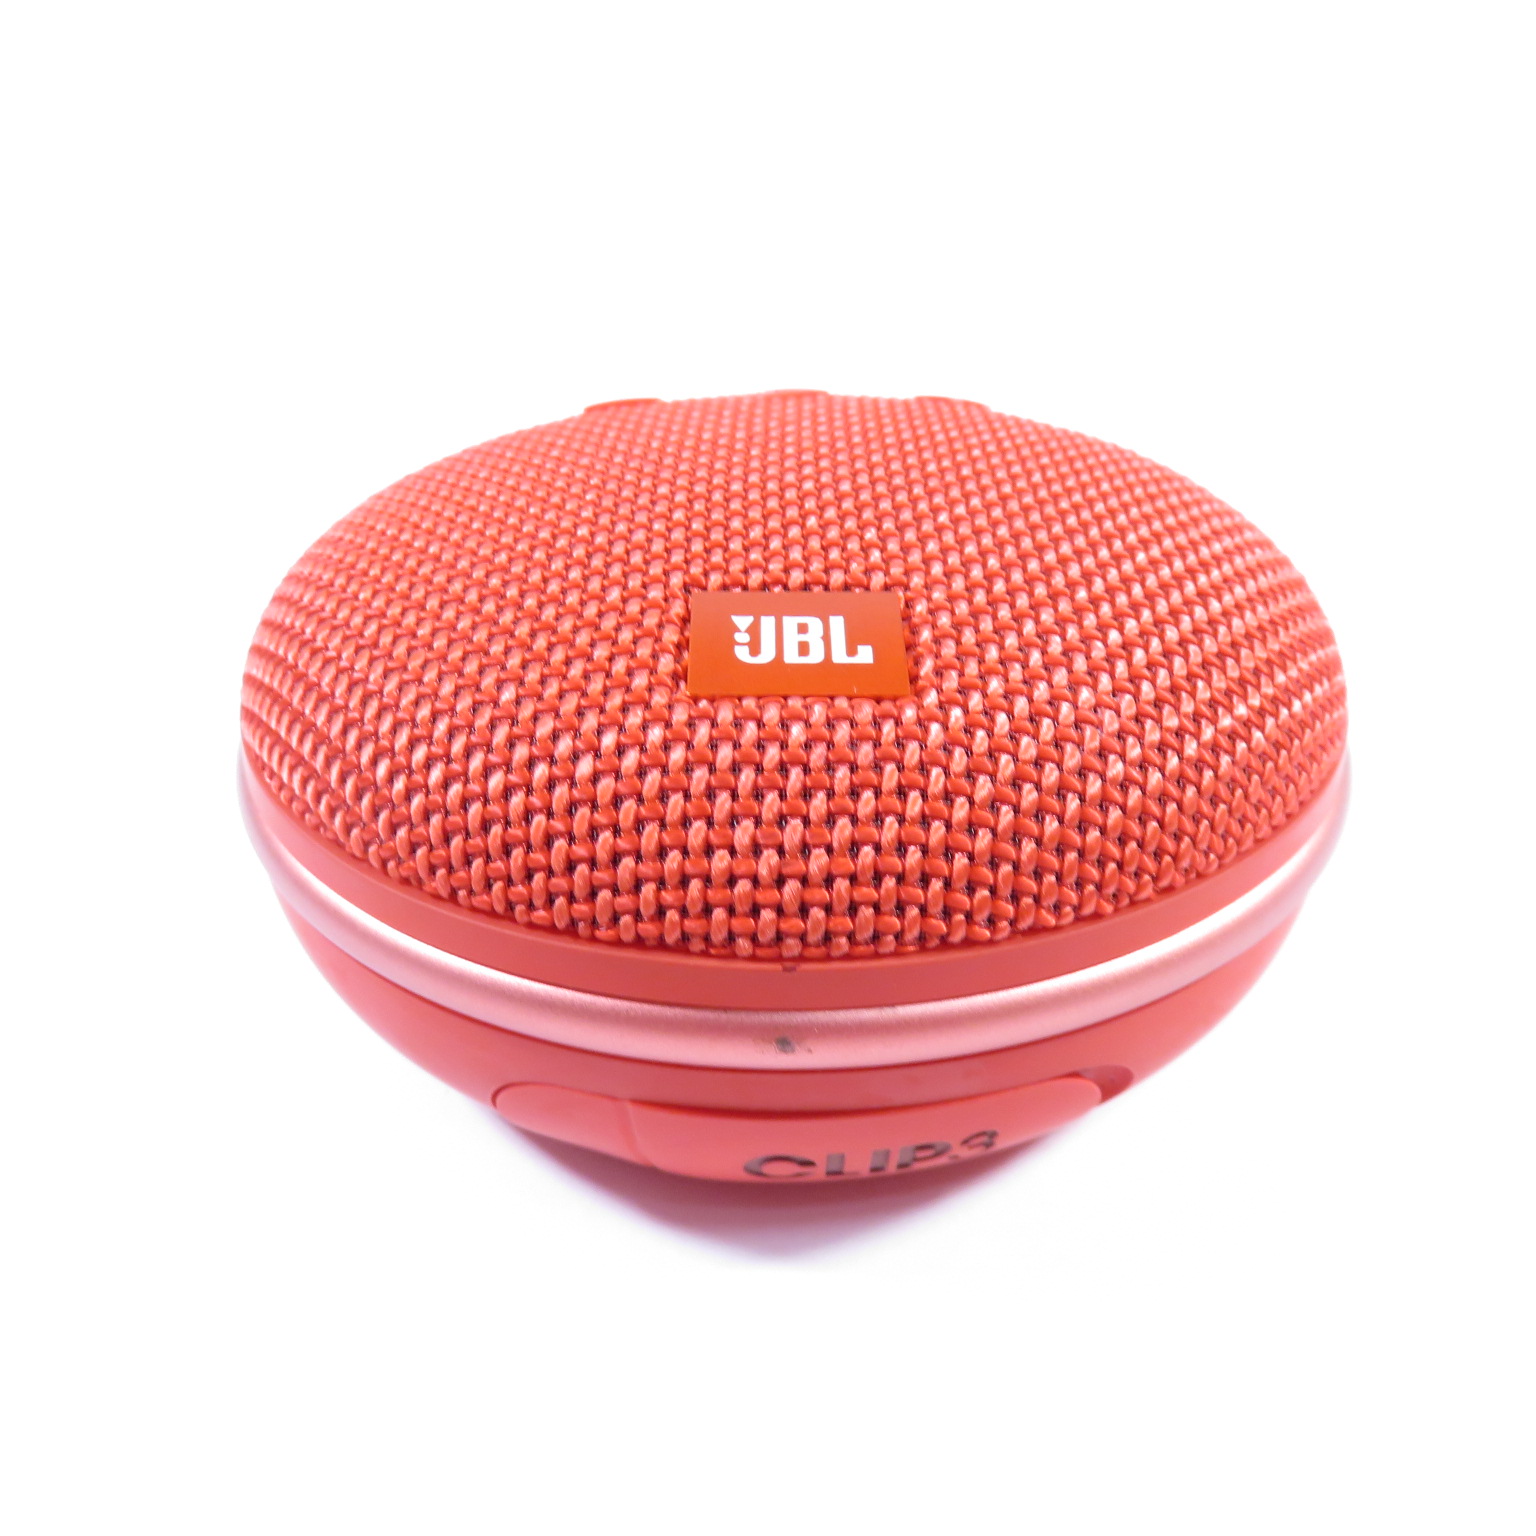 JBL Clip 3 Portable Bluetooth Speaker with Carabiner - Red 